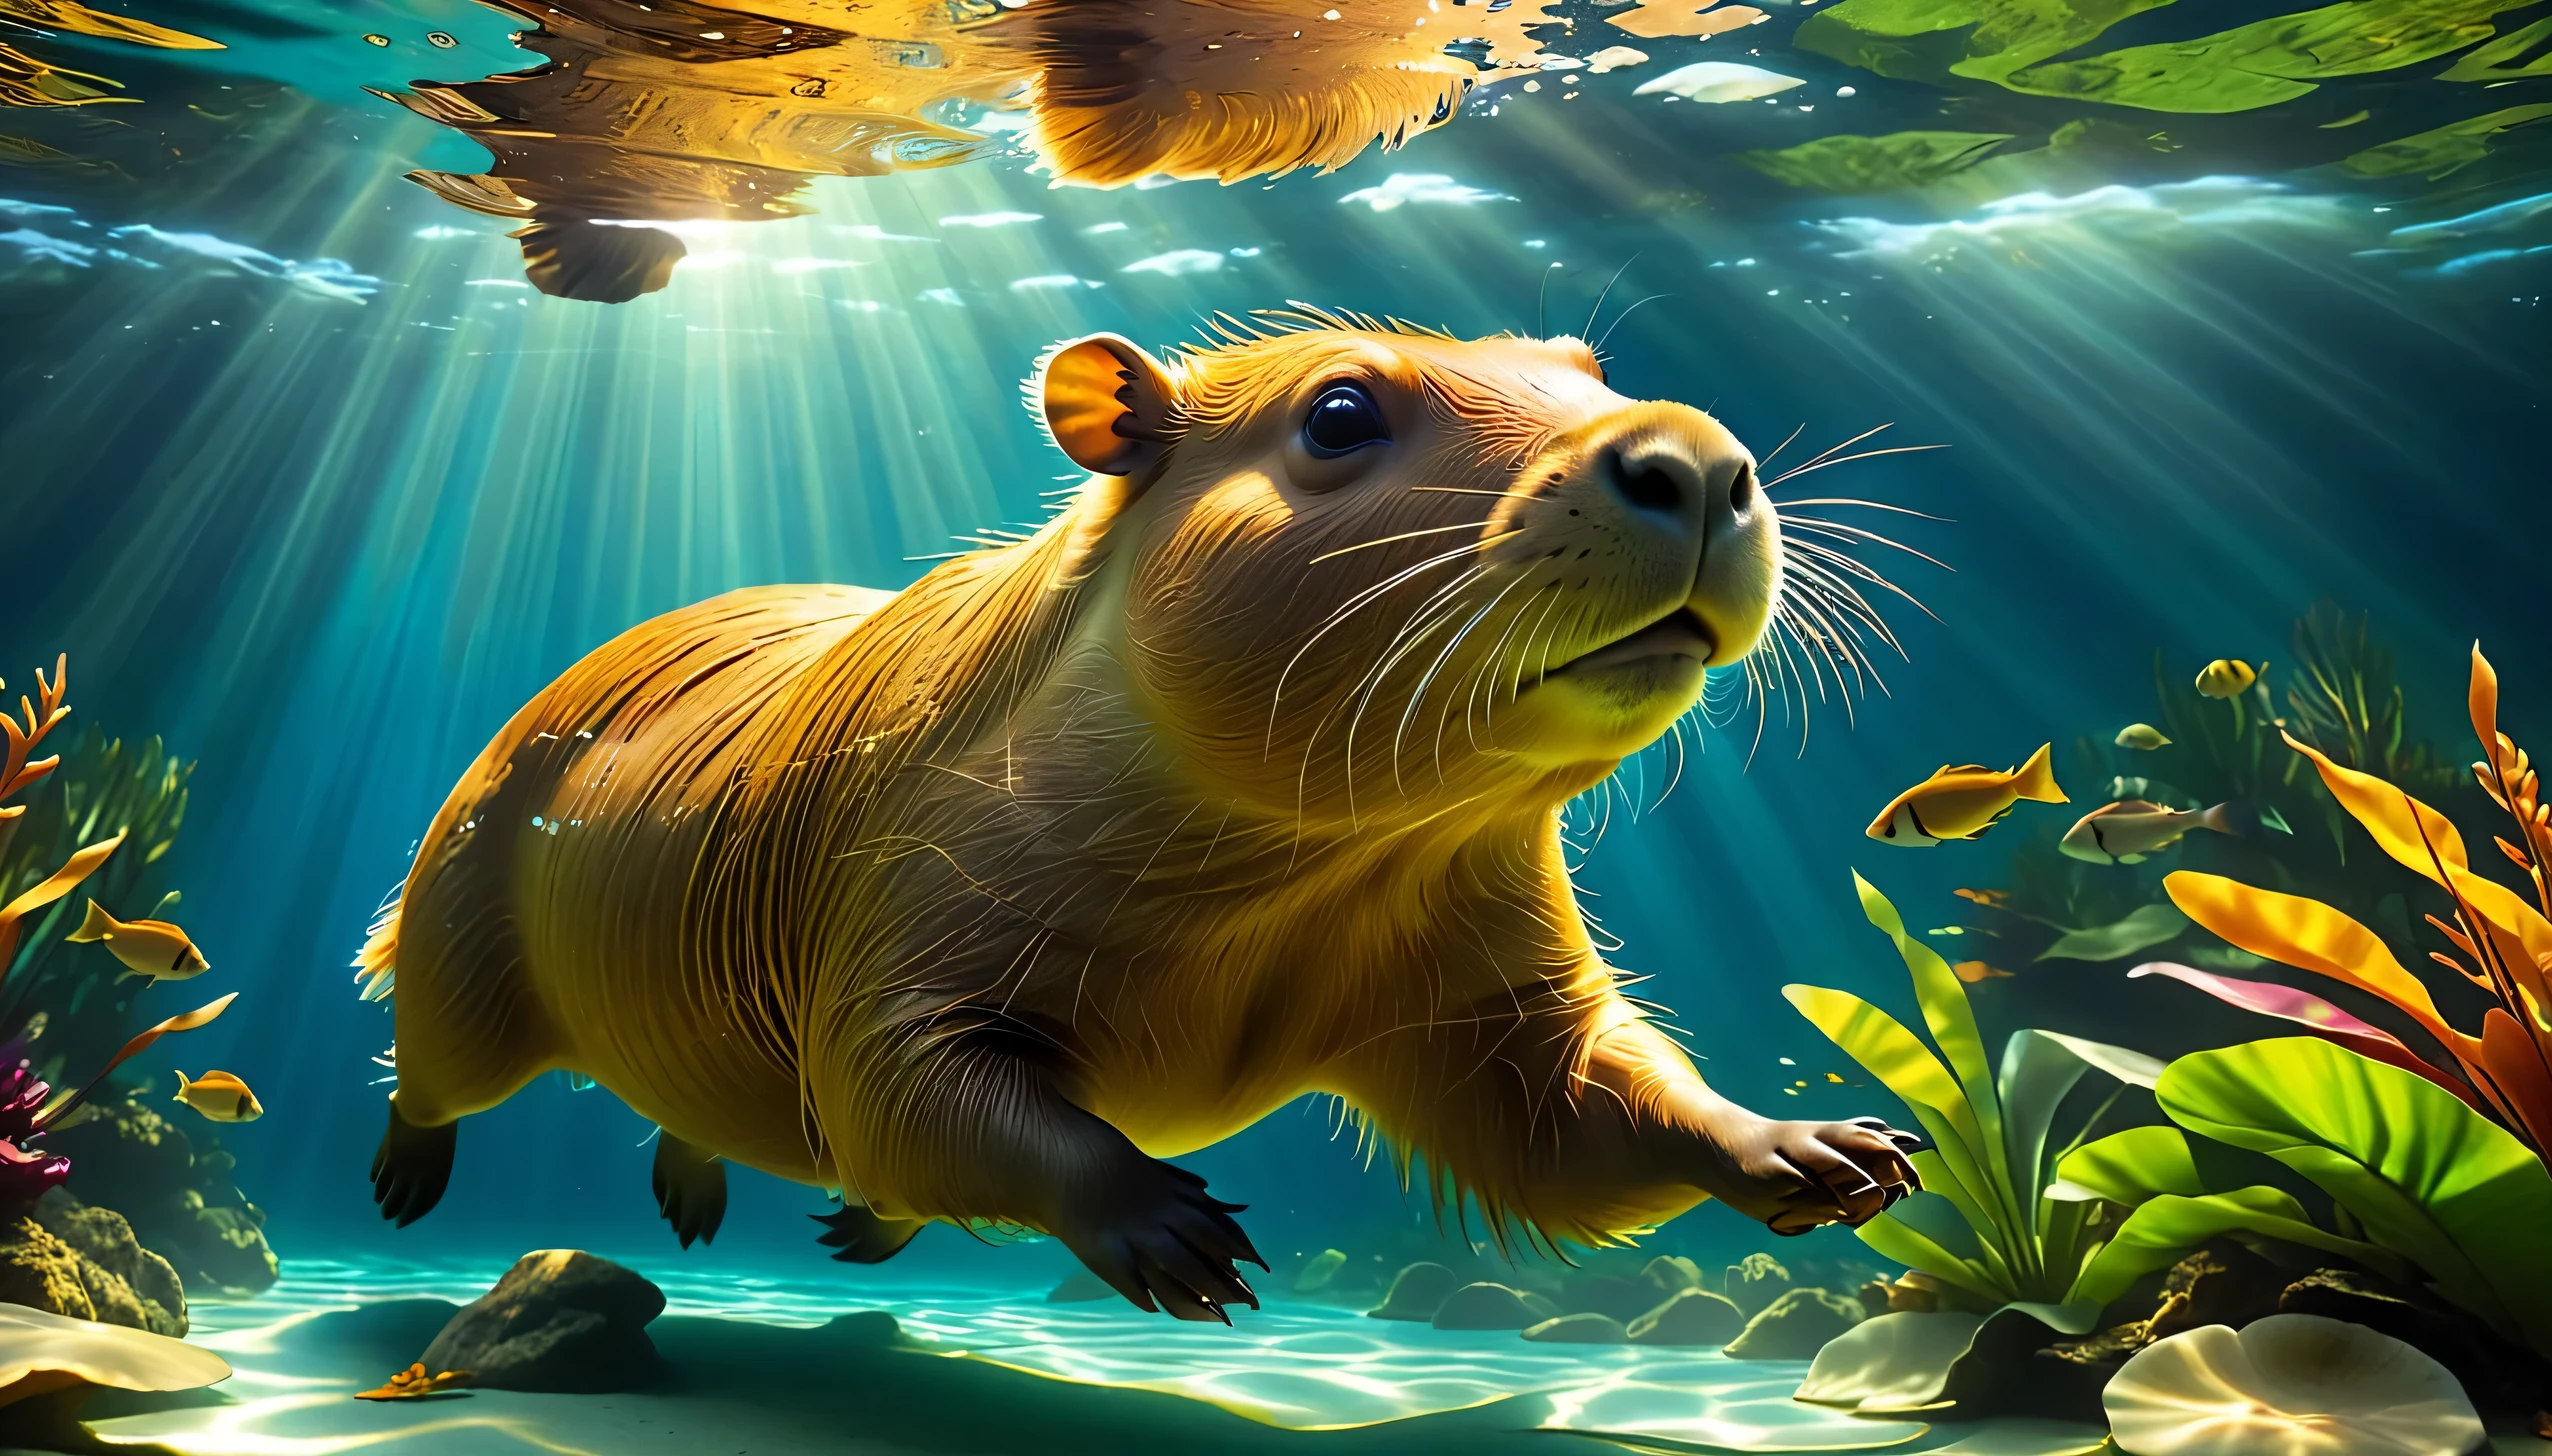 A Capybara, Underwater Serenity, Gliding effortlessly through the water, its fur shimmering in the sunlight filtering through the surface, A calm and serene expression, at peace with the underwater world, A deep, clear pool in a tropical rainforest, surrounded by exotic fish and plants, Sunbeams piercing through the water, creating a mesmerizing interplay of light and shadow, Peaceful, serene, and dreamlike, Underwater shot with a wide-angle lens to capture the vastness of the underwater world and the tranquil interaction 